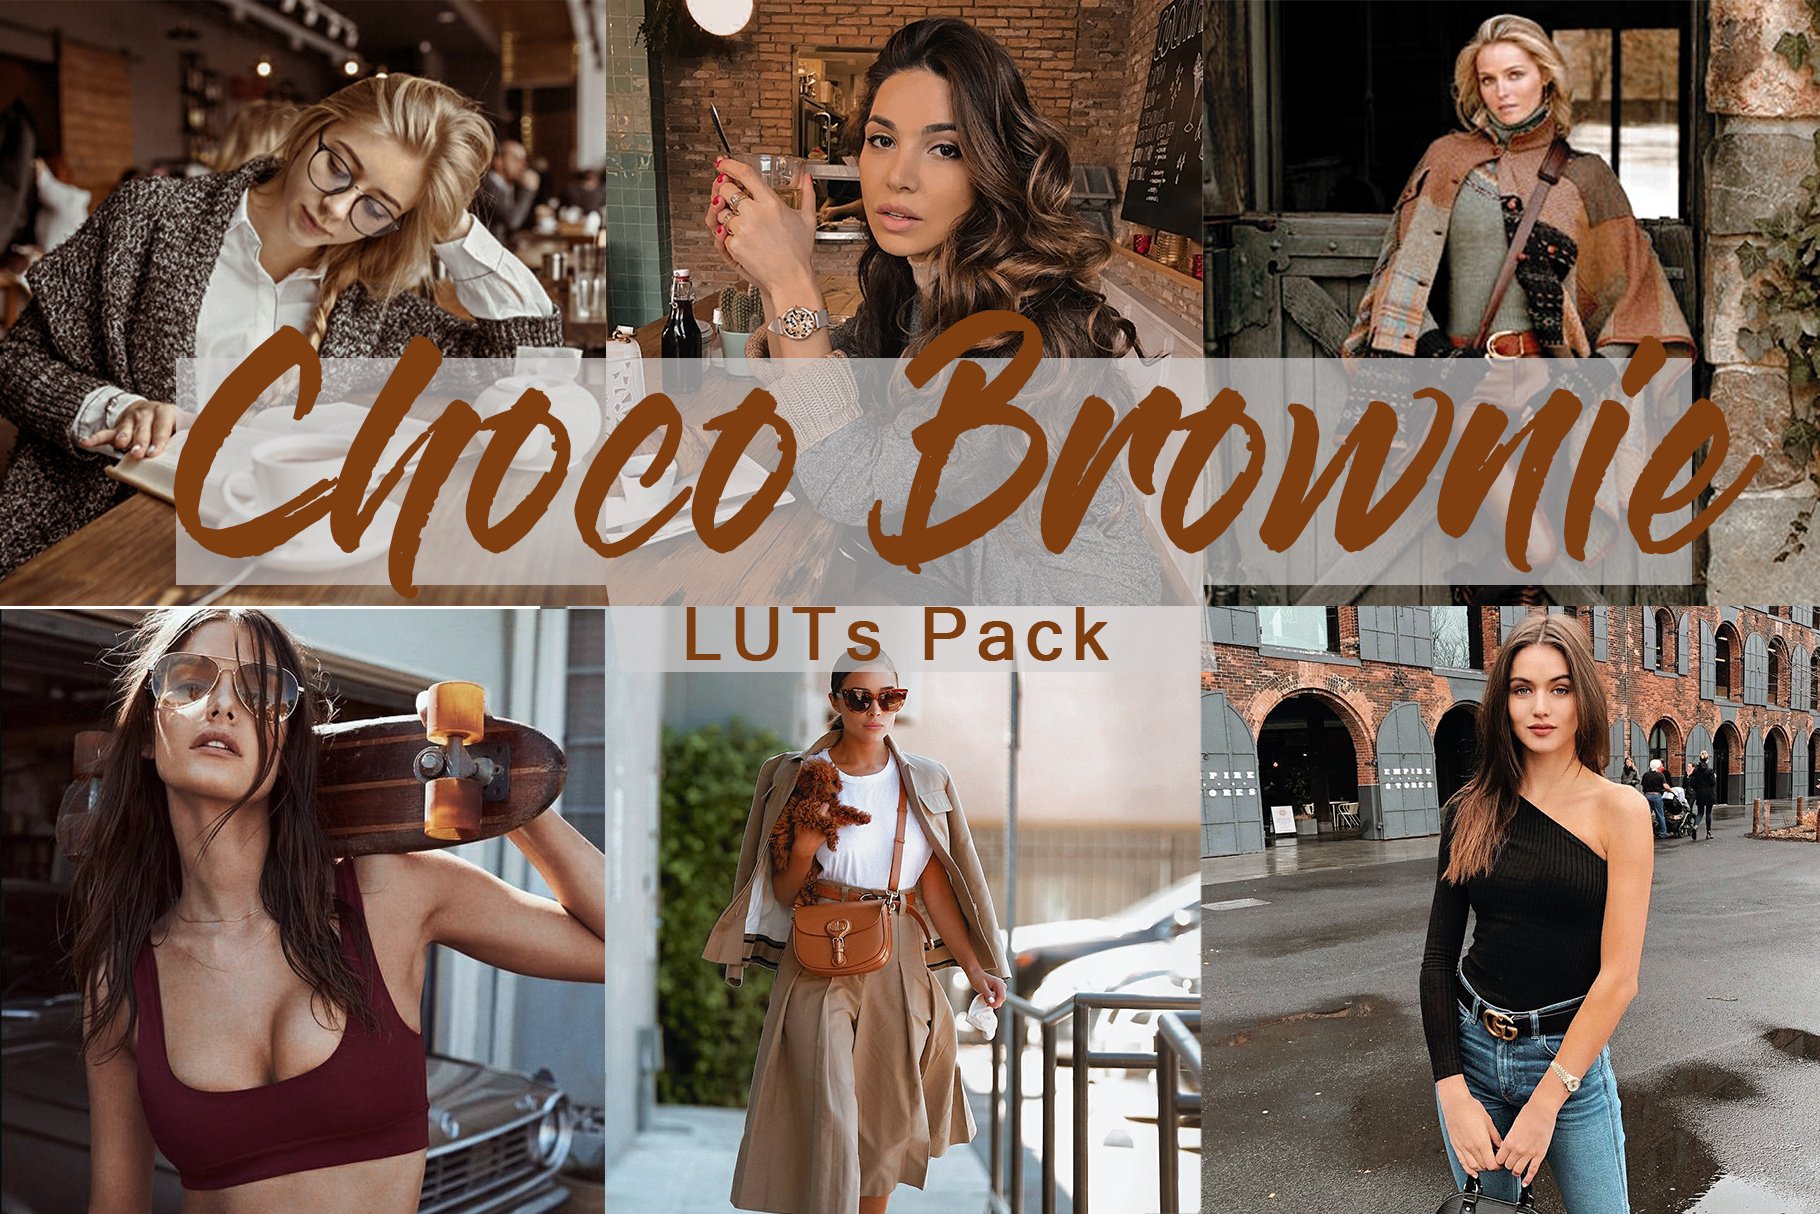 Choco Brownie LUTs Packcover image.